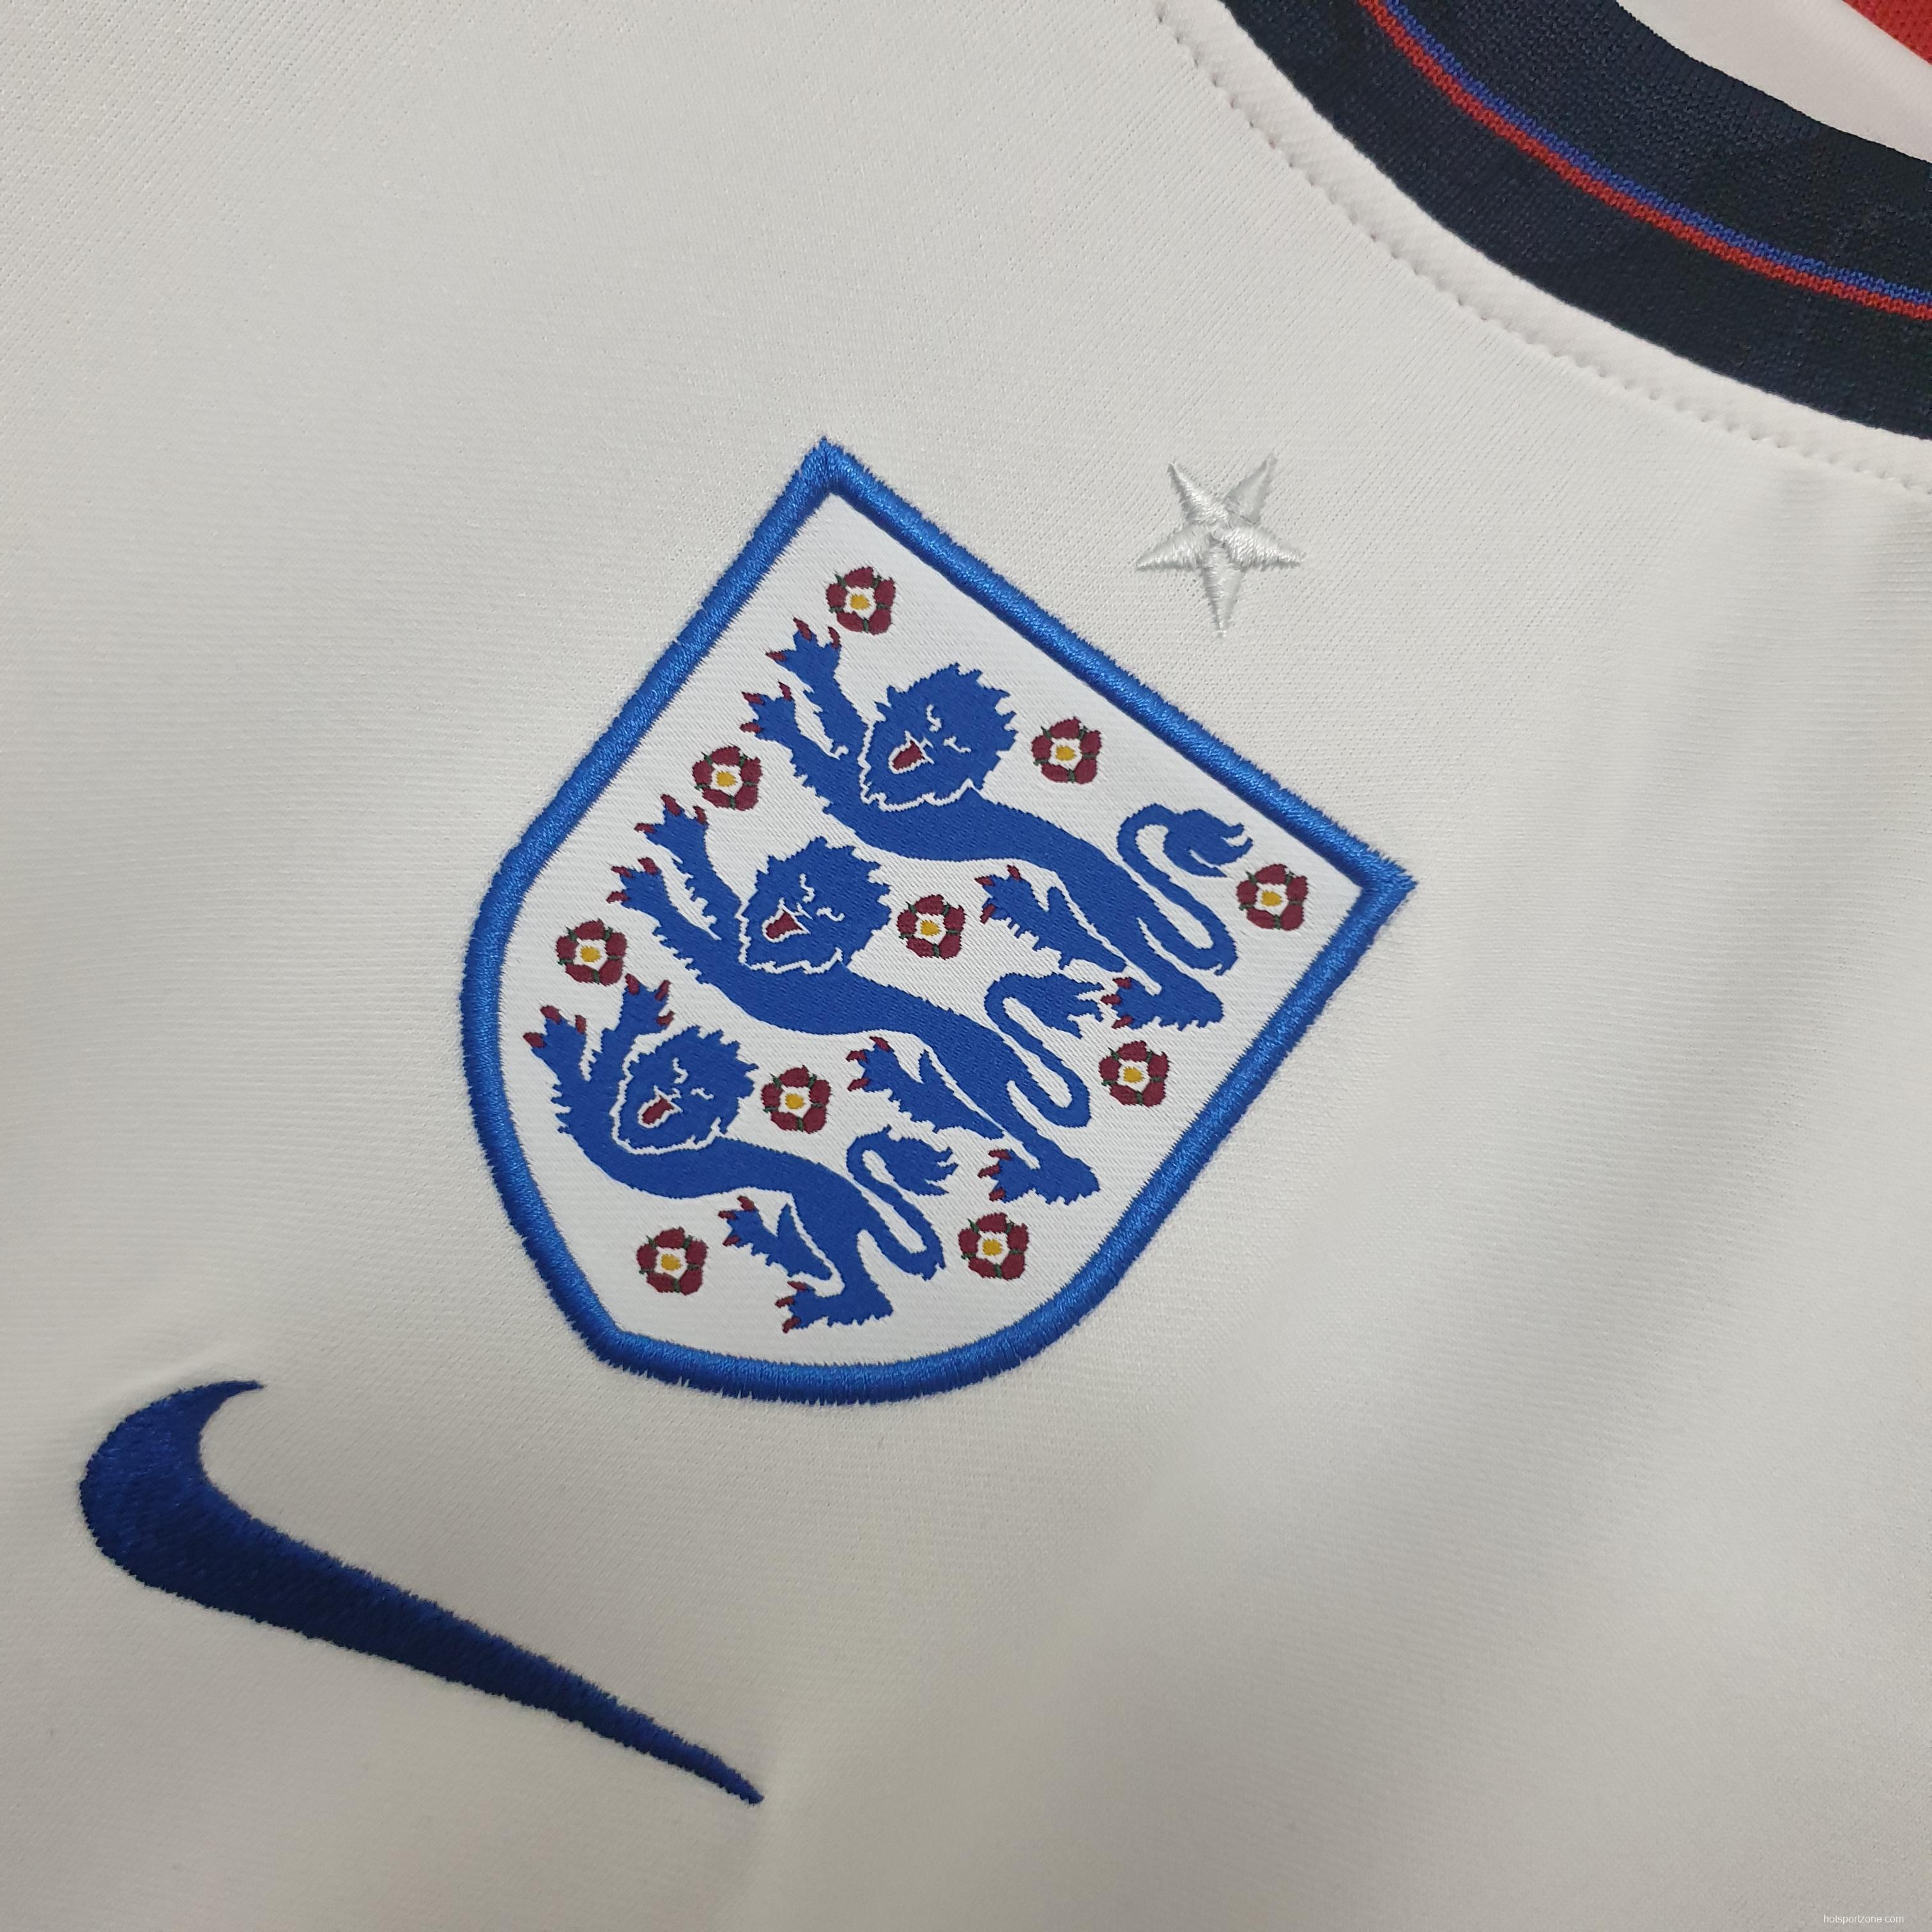 2020 England home Soccer Jersey